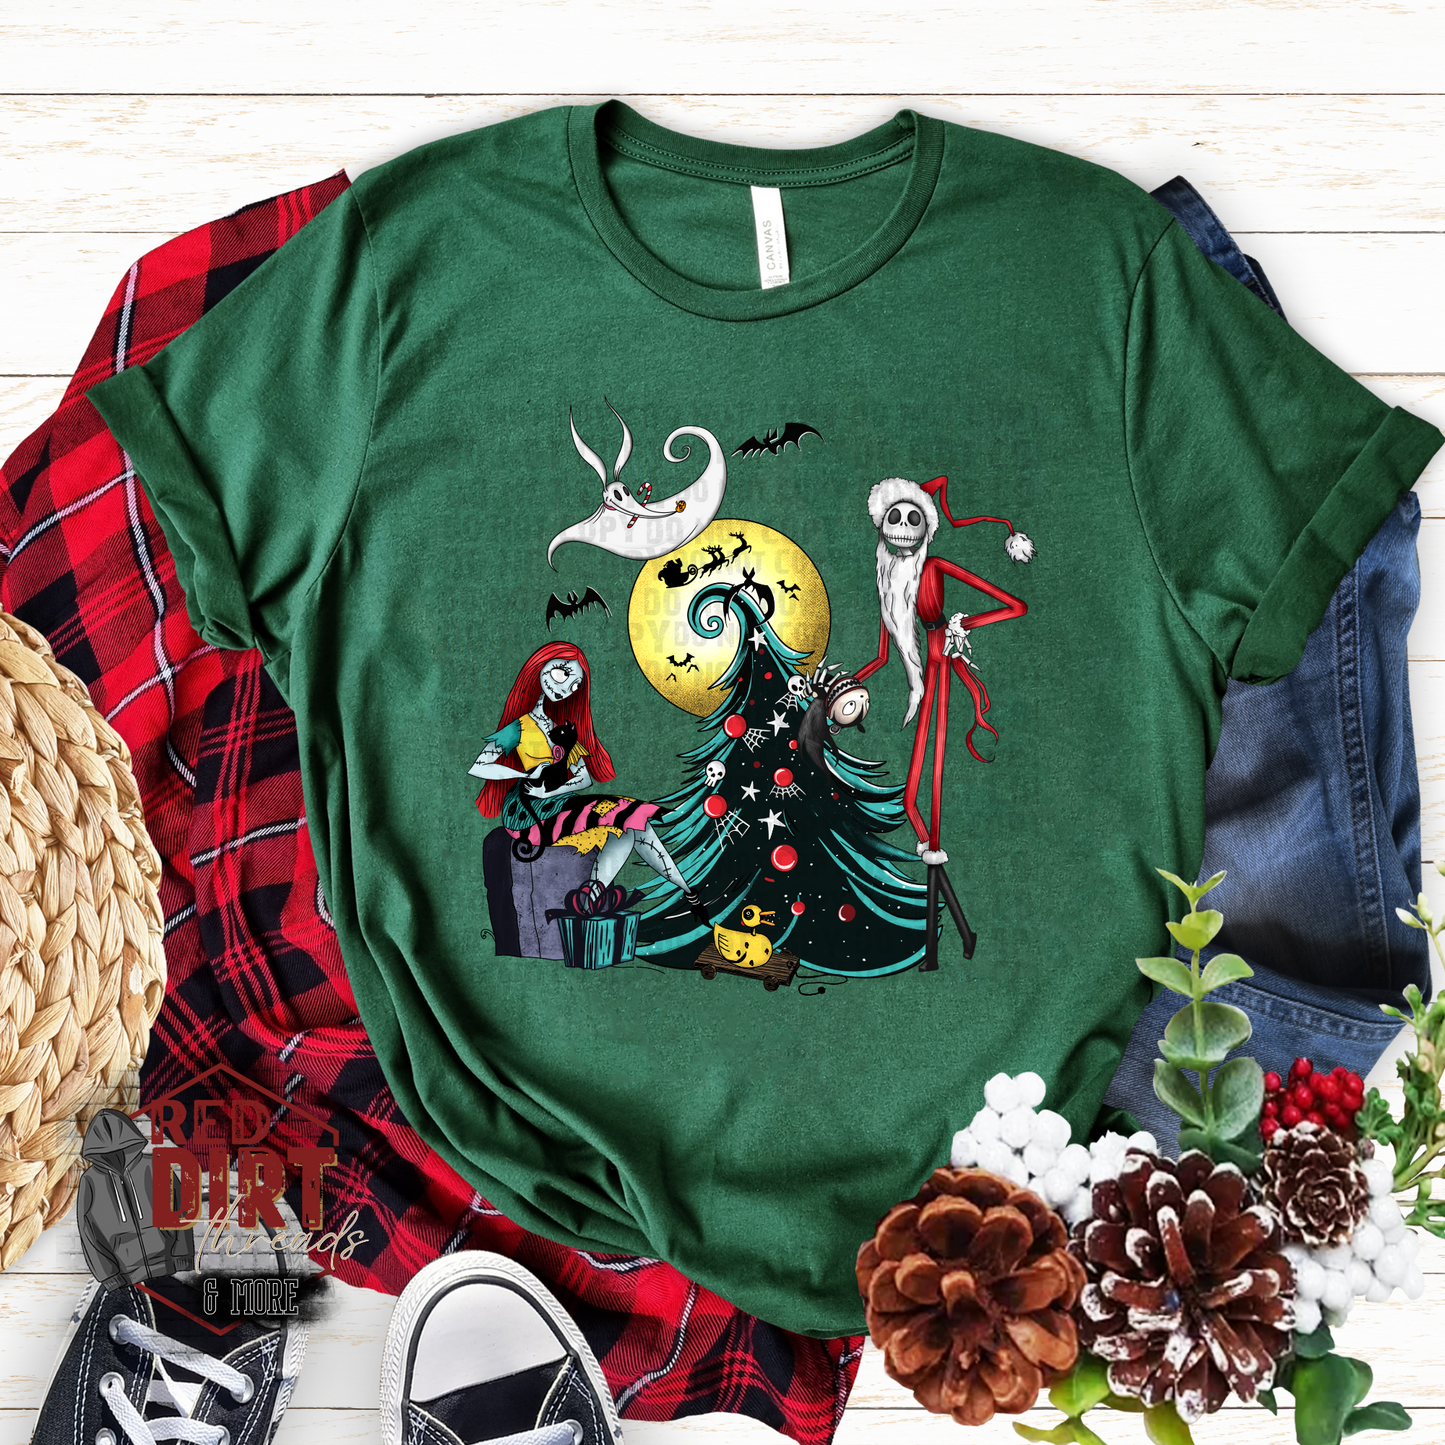 Jack and Sally T-Shirt |Trendy Christmas Movie Shirt | Fast Shipping | Super Soft Shirts for Women/Kid's